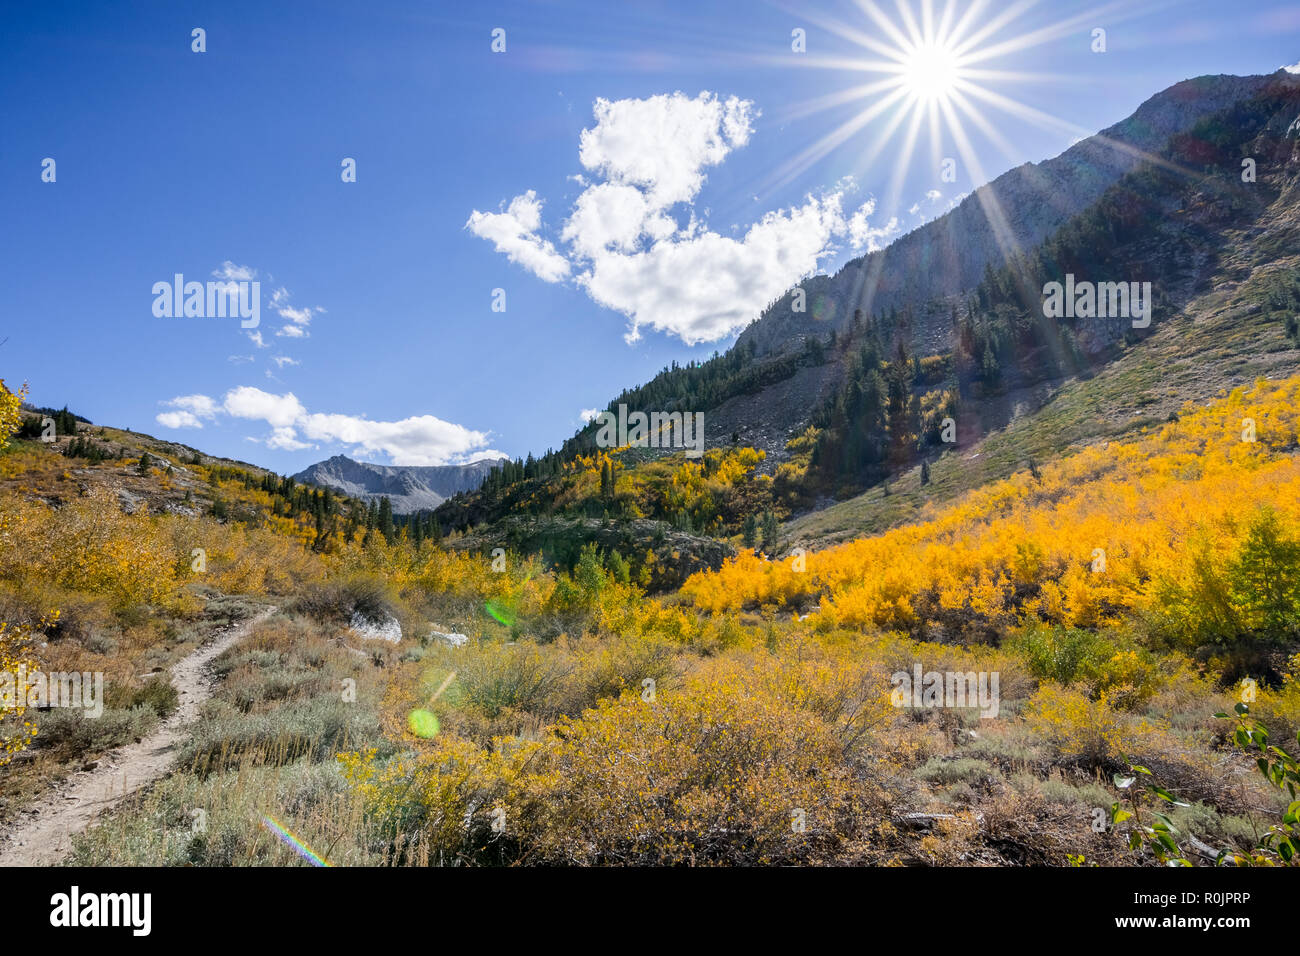 Fall colors covering McGee Creek valley in Eastern Sierra mountains, California Stock Photo